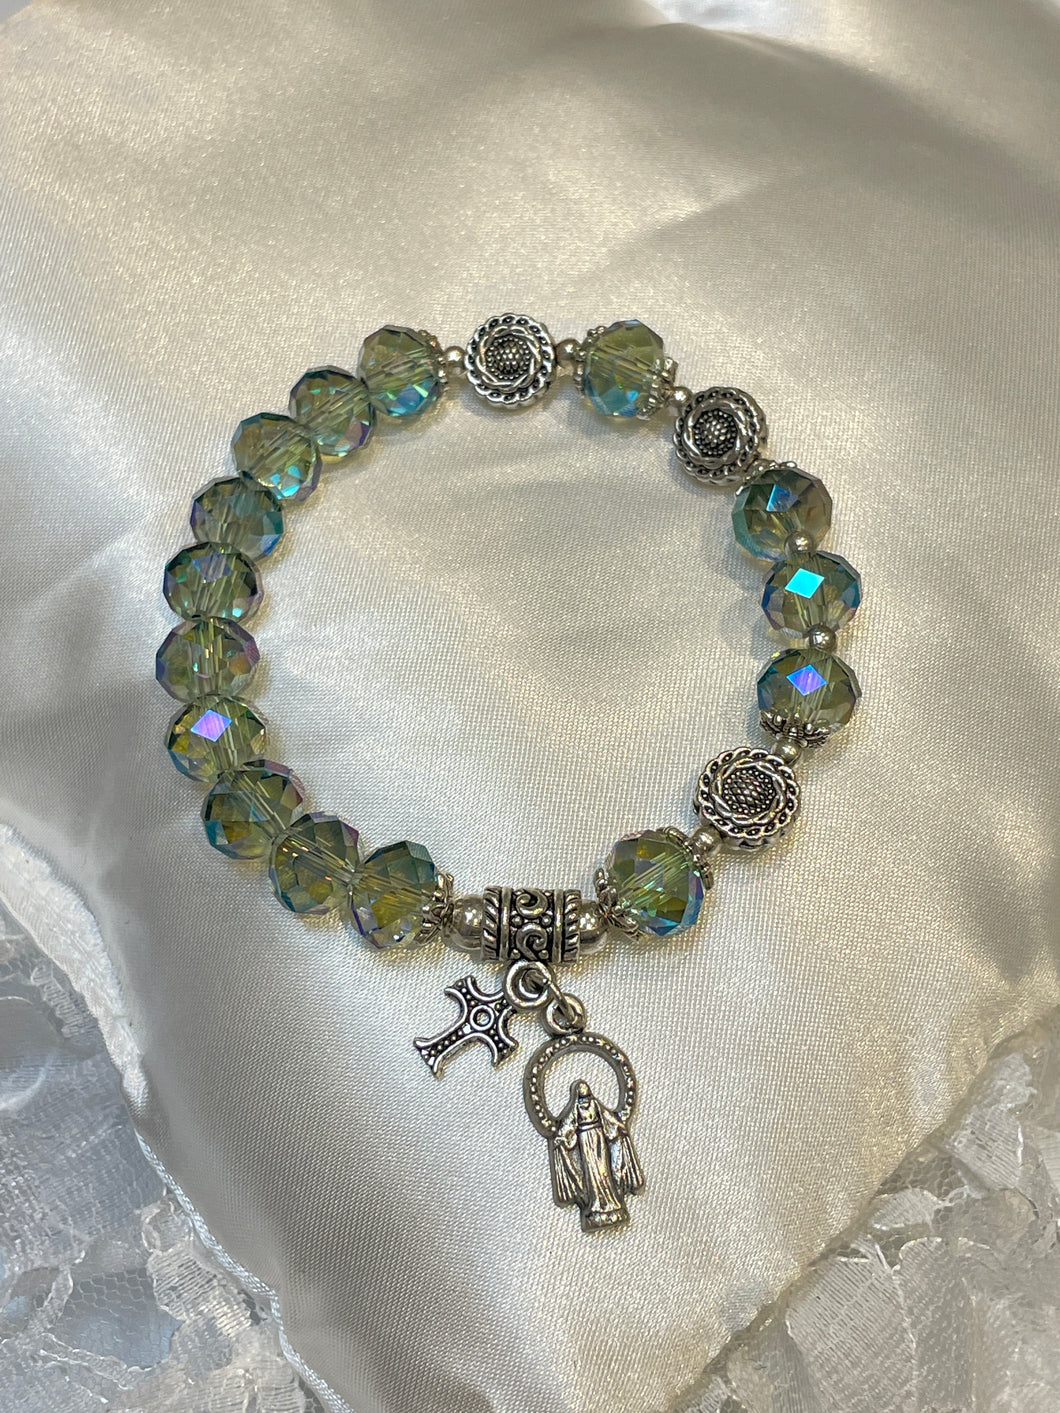 Teal Crystal Rosary Bracelet with Our Lady of Grace and Cross Charms